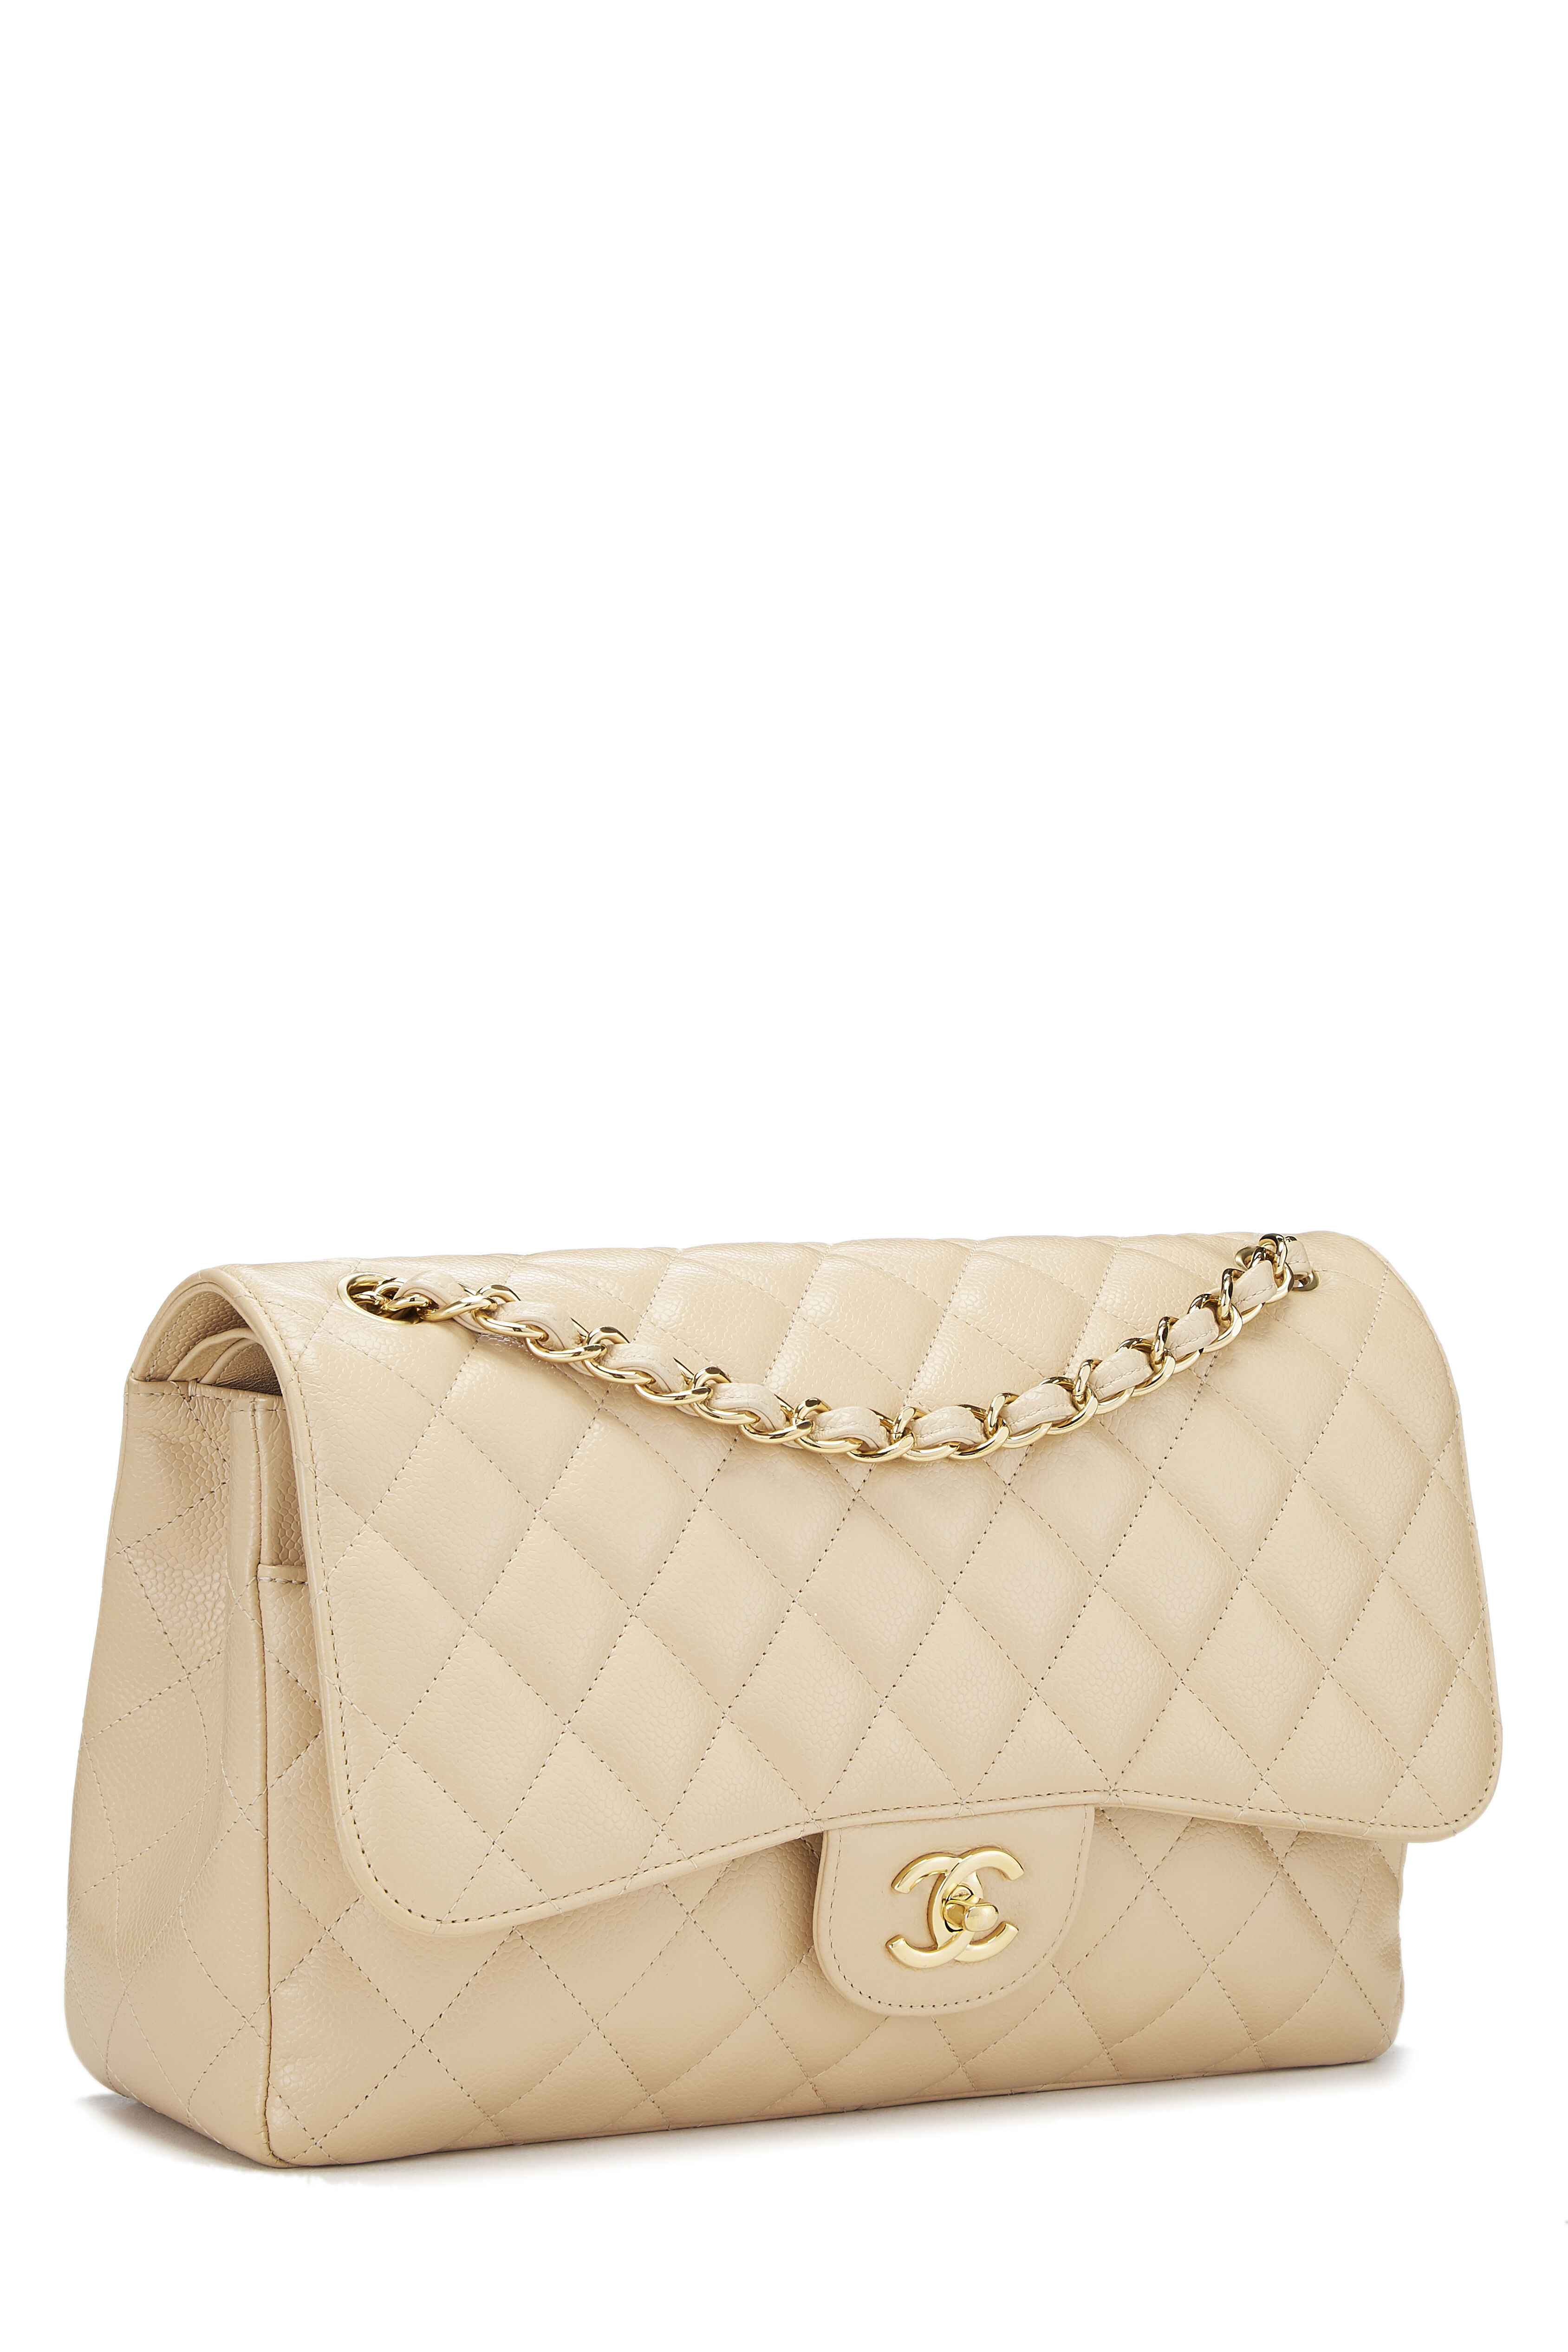 Chanel Beige Quilted Caviar New Classic Double Flap Jumbo Q6BAQP0FI4041